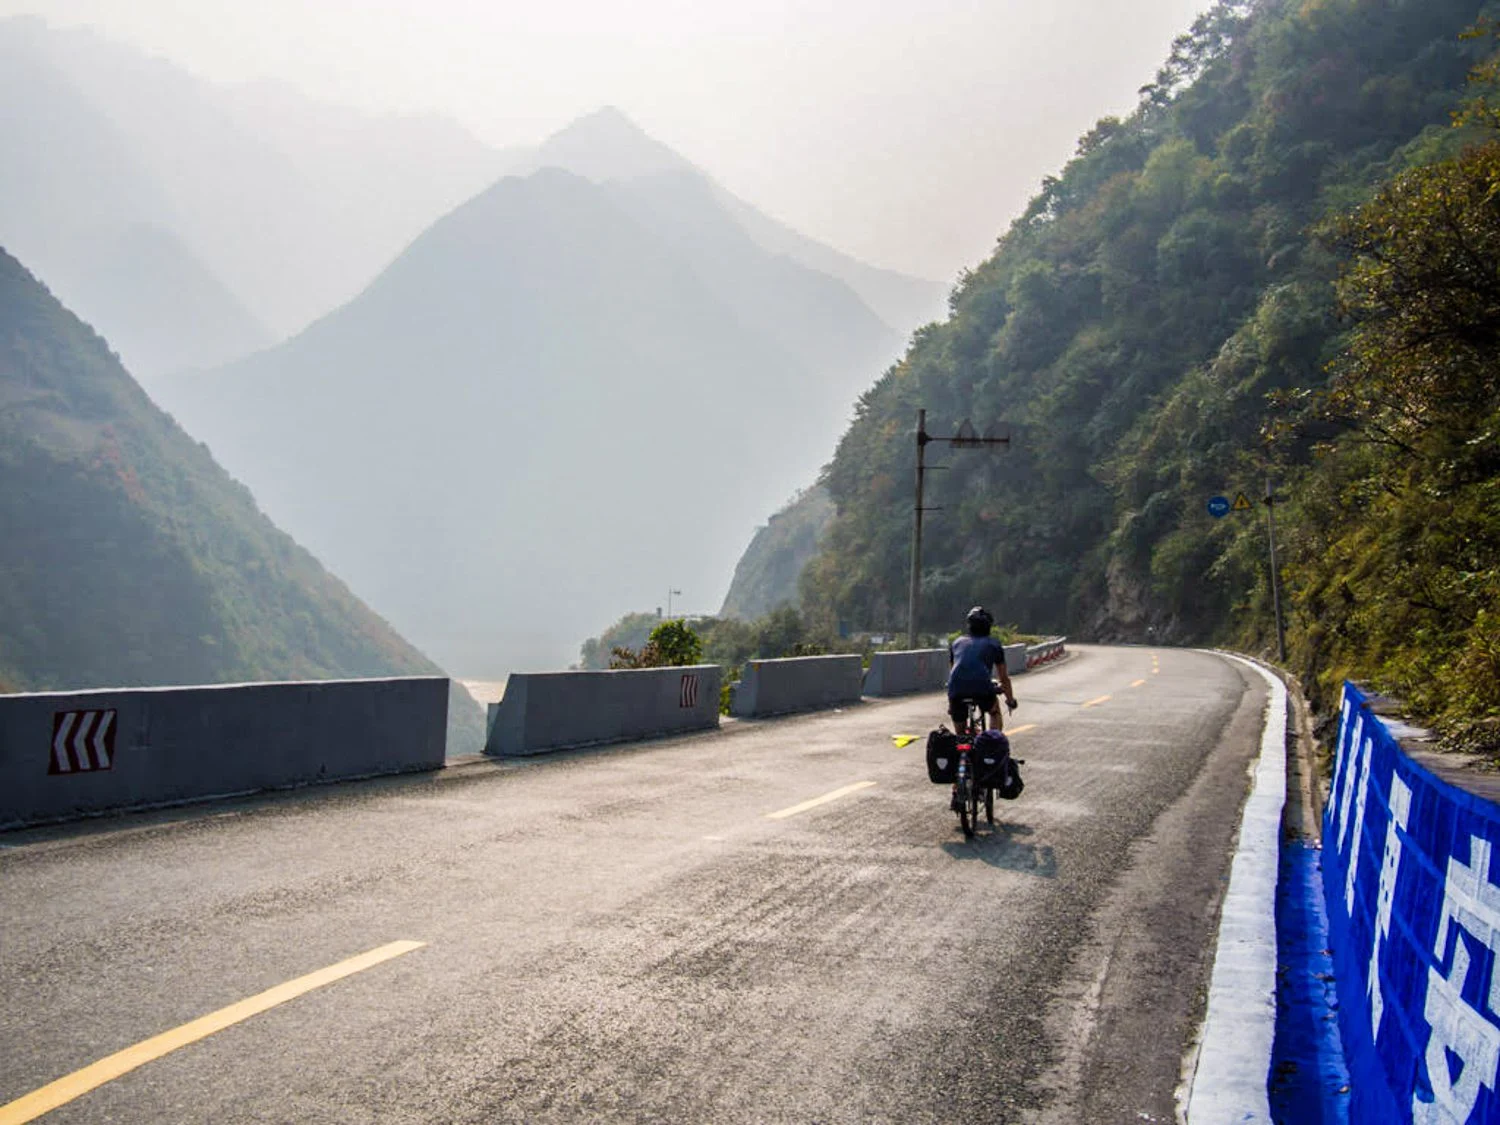 Stephen ascending a misty mountain pass by bike in China.